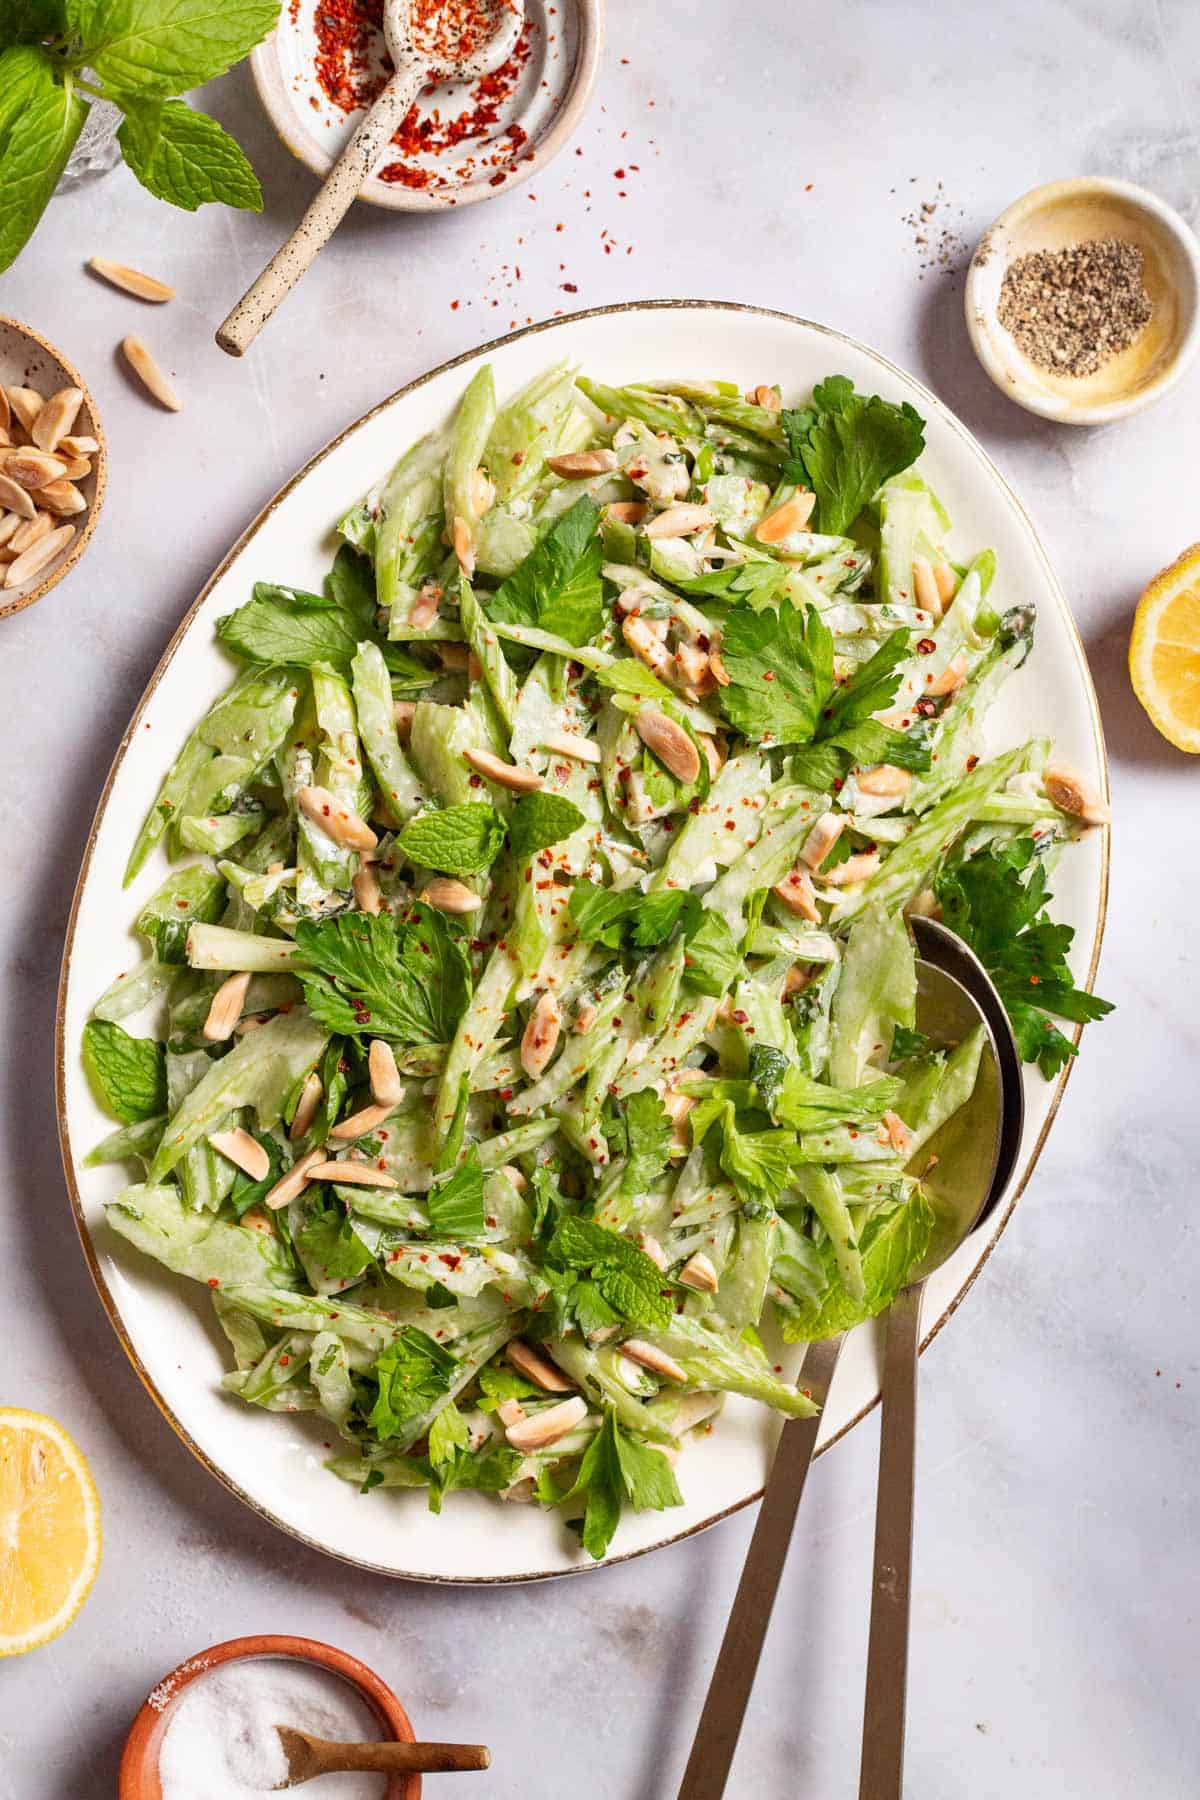 An overhead photo of celery salad on a serving platter with serving utensils. Next to this are bowls of slivered almonds, aleppo pepper, black pepper, salt lemon halves, and mint.